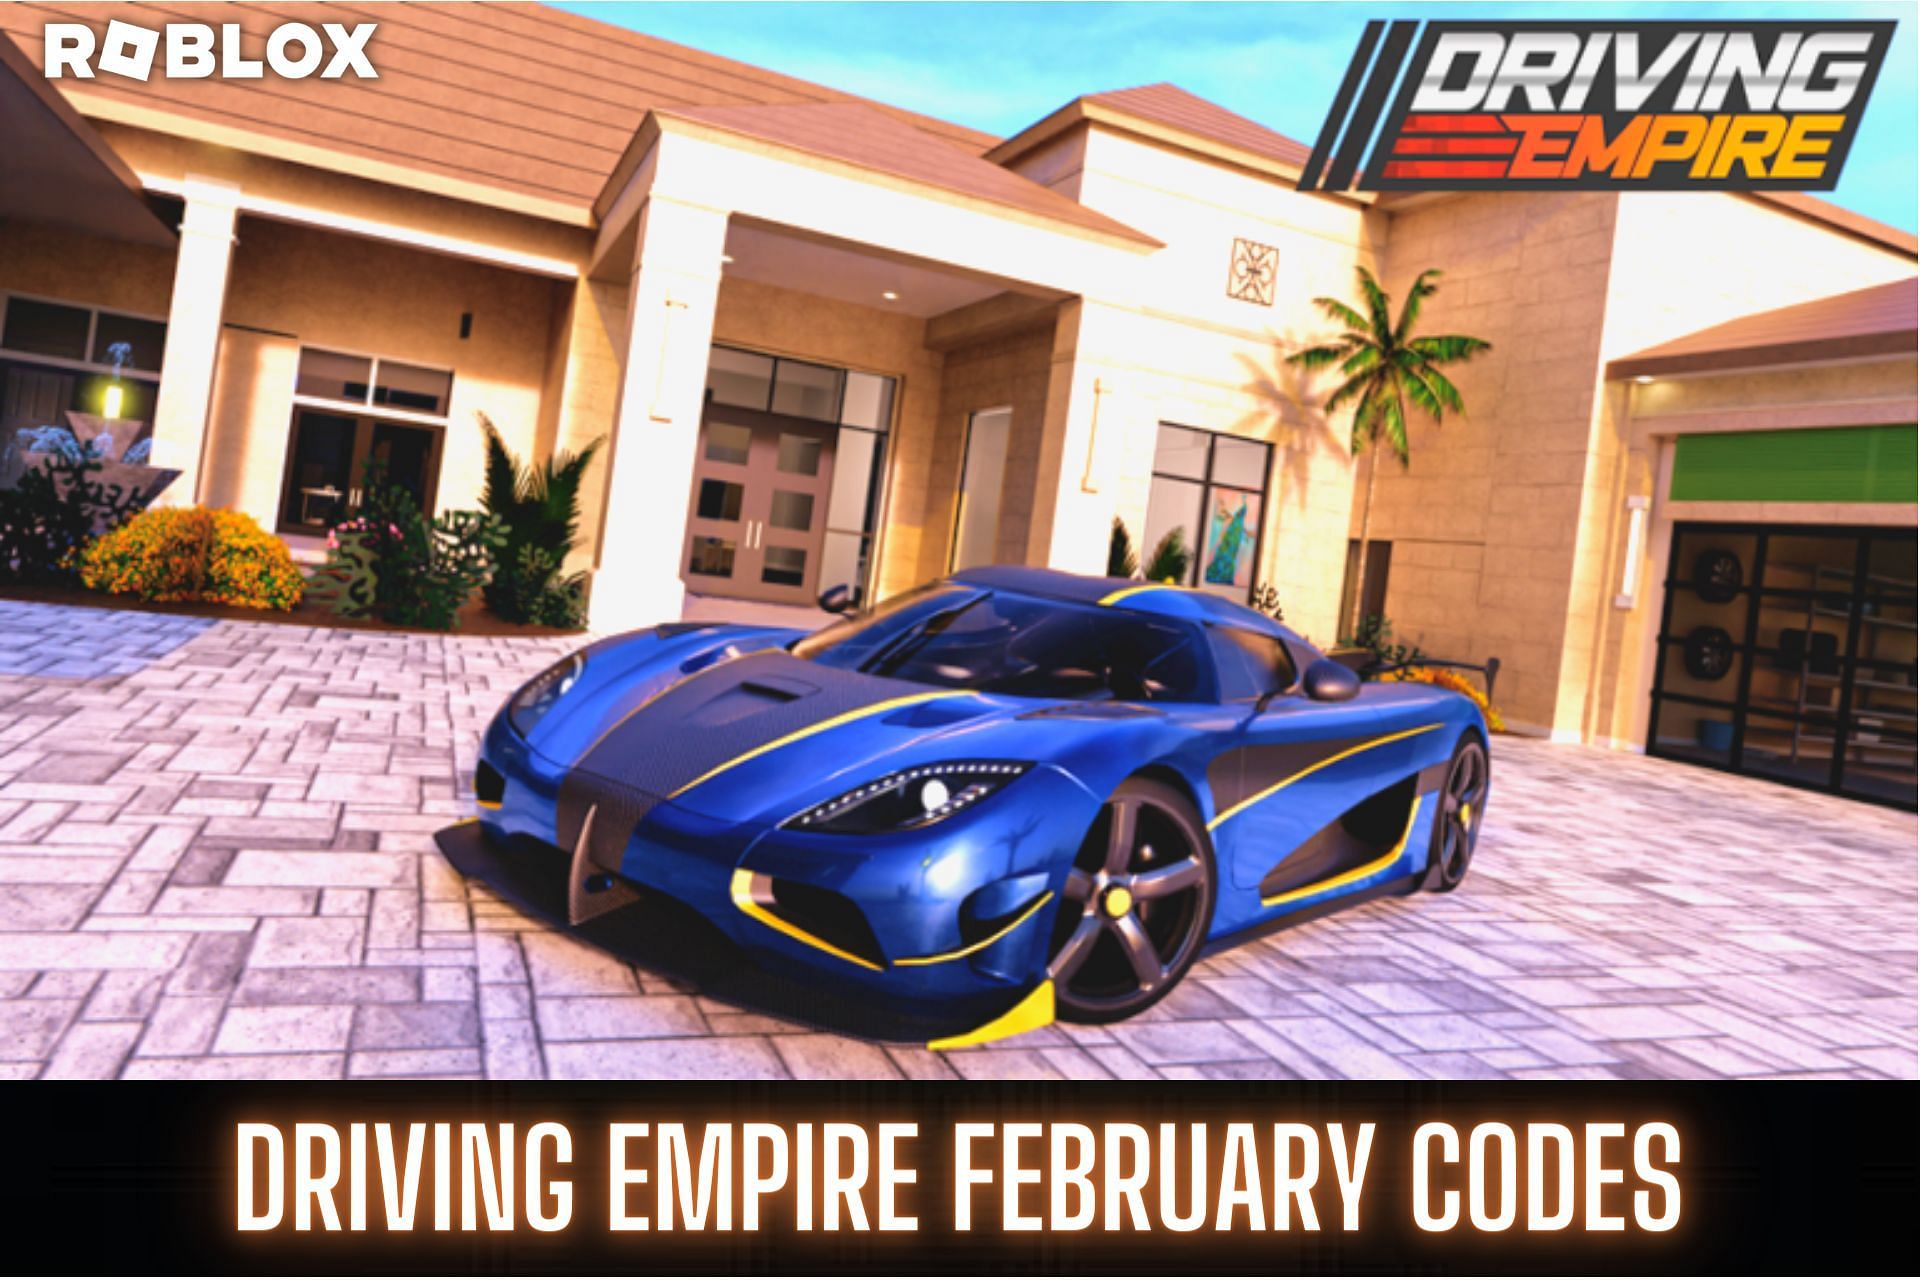 Roblox Driving Empire codes (February 2023)